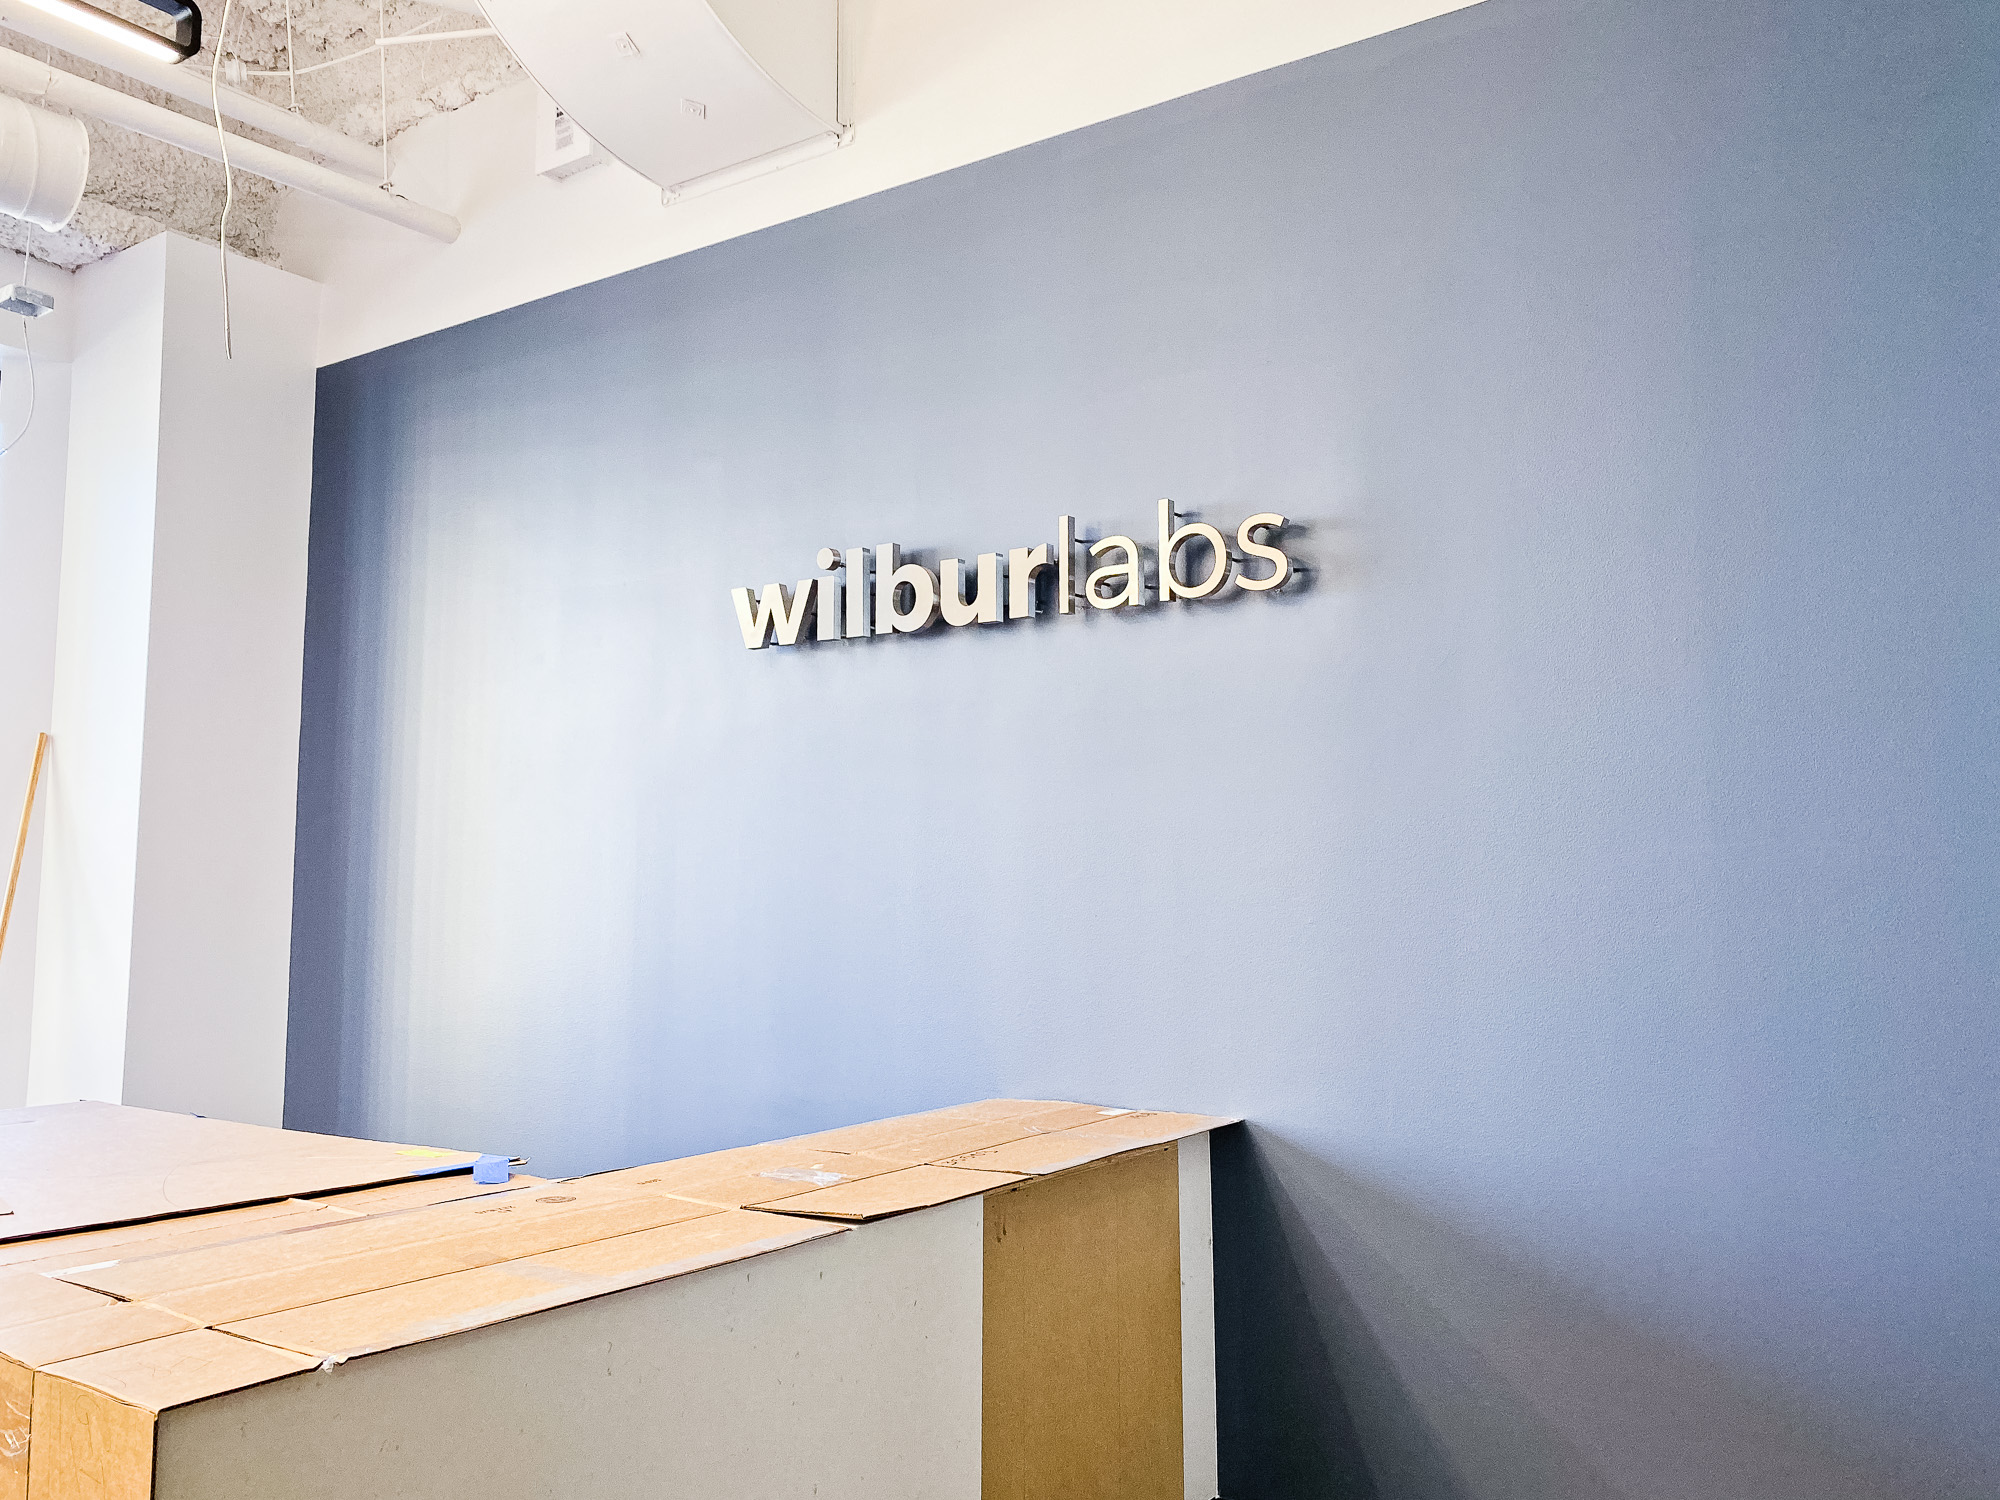 Illuminated, back-lit metal sign on slate colored wall for Wilbur Labs, a San Francisco-based startup studio building a portfolio of companies.